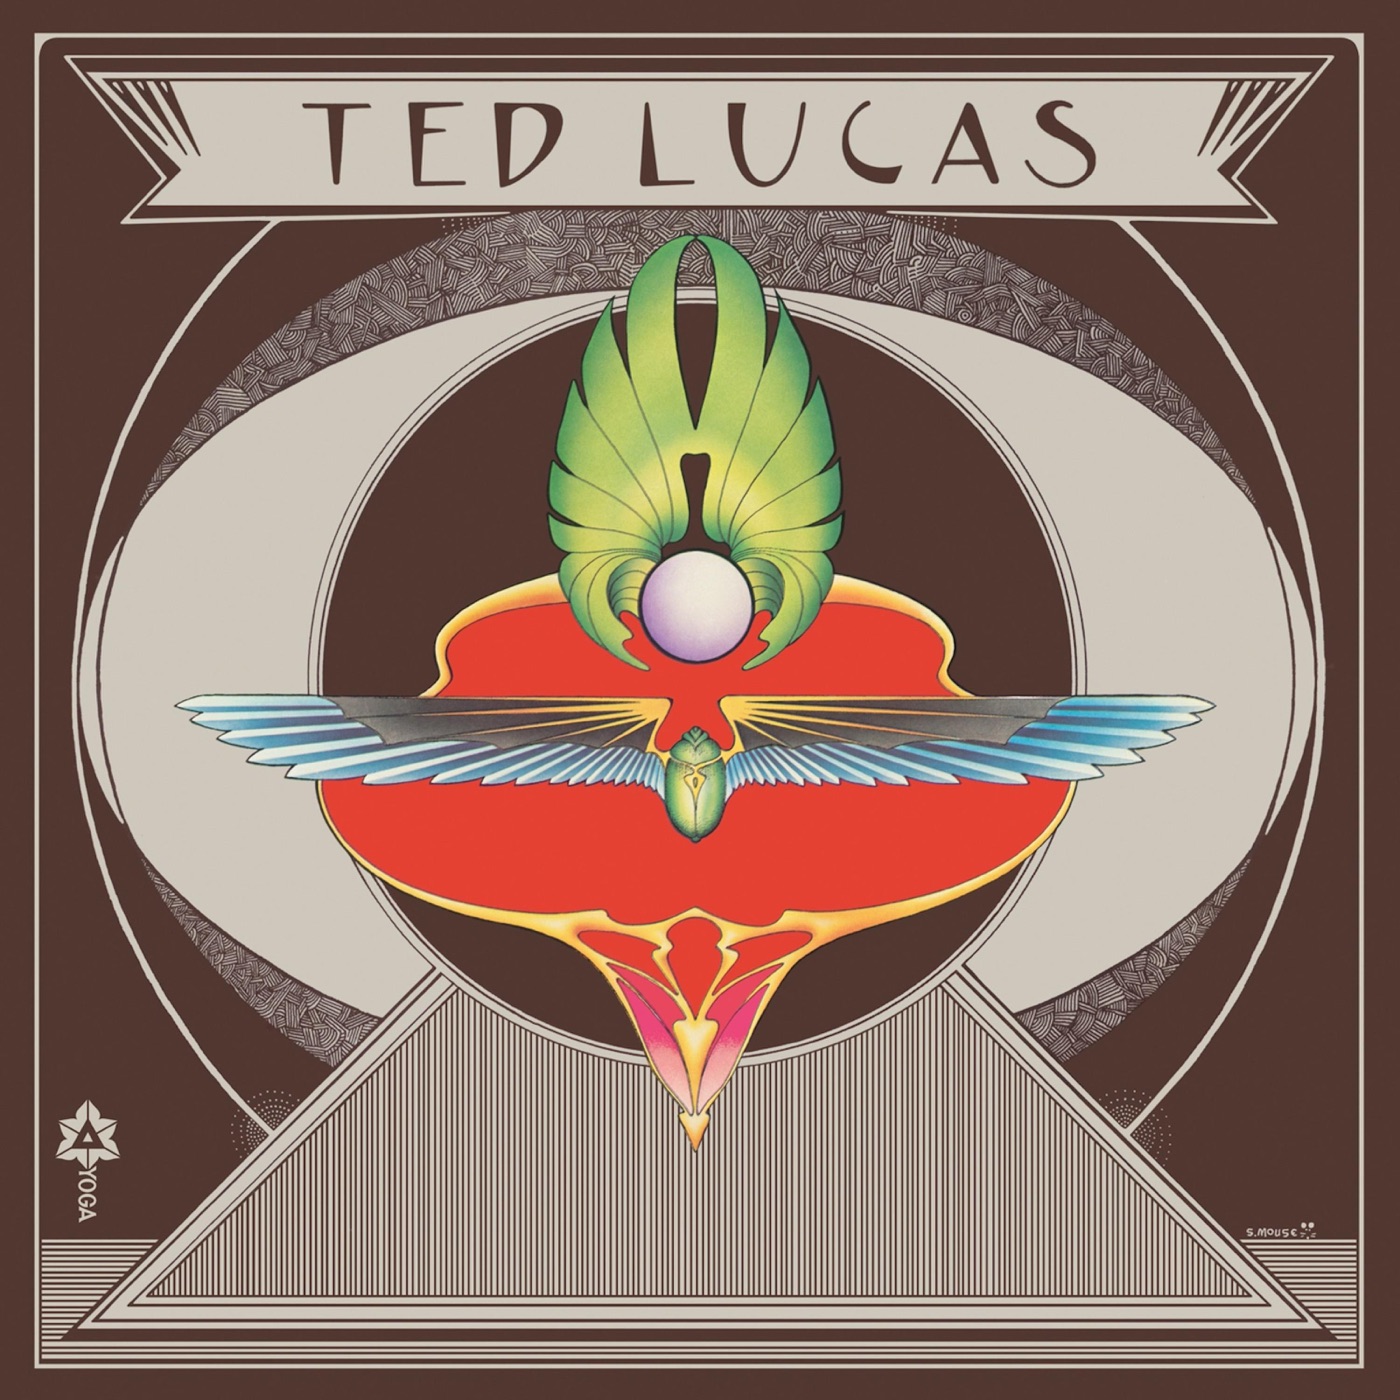 It's So Easy (When You Know What You're Doing) by Ted Lucas